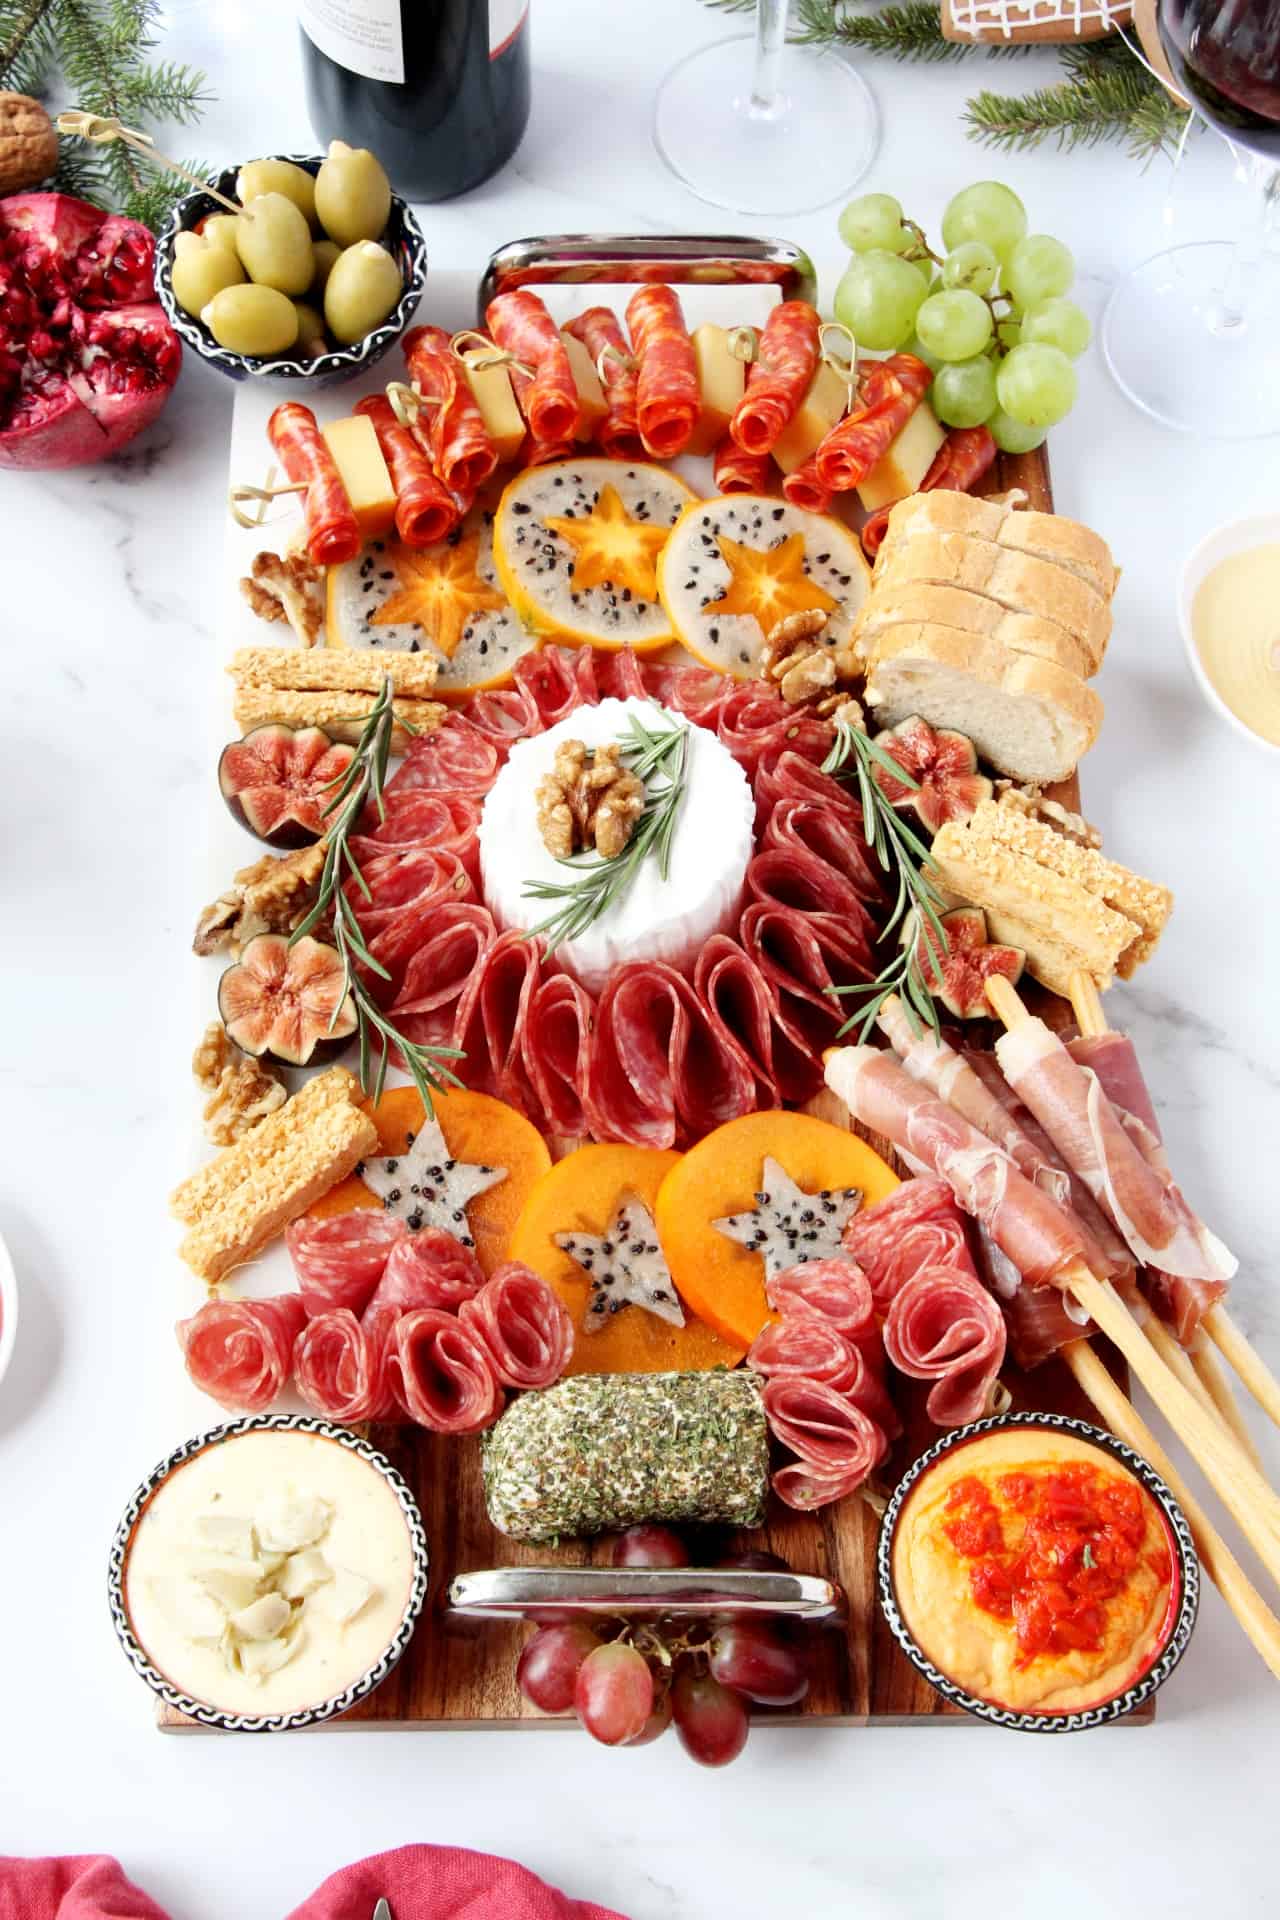 Holiday Charcuterie board with a centerpiece of brie, lots of meats and cheeses.